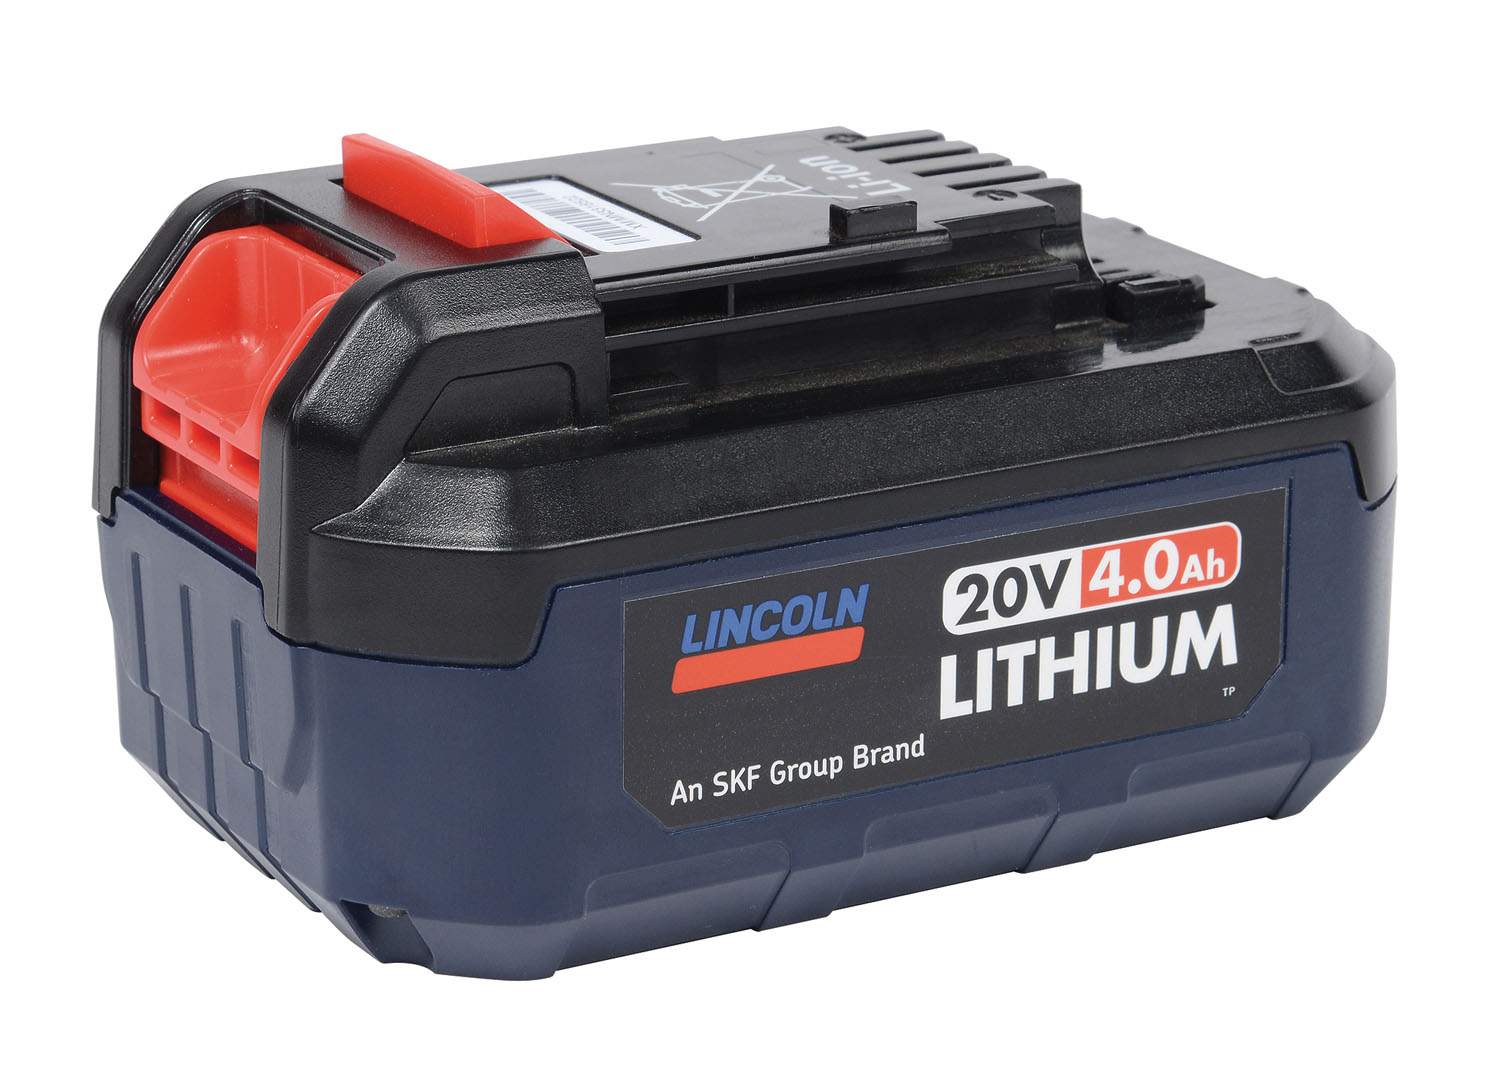 20 Volt High Amp Lithium Ion Battery Image